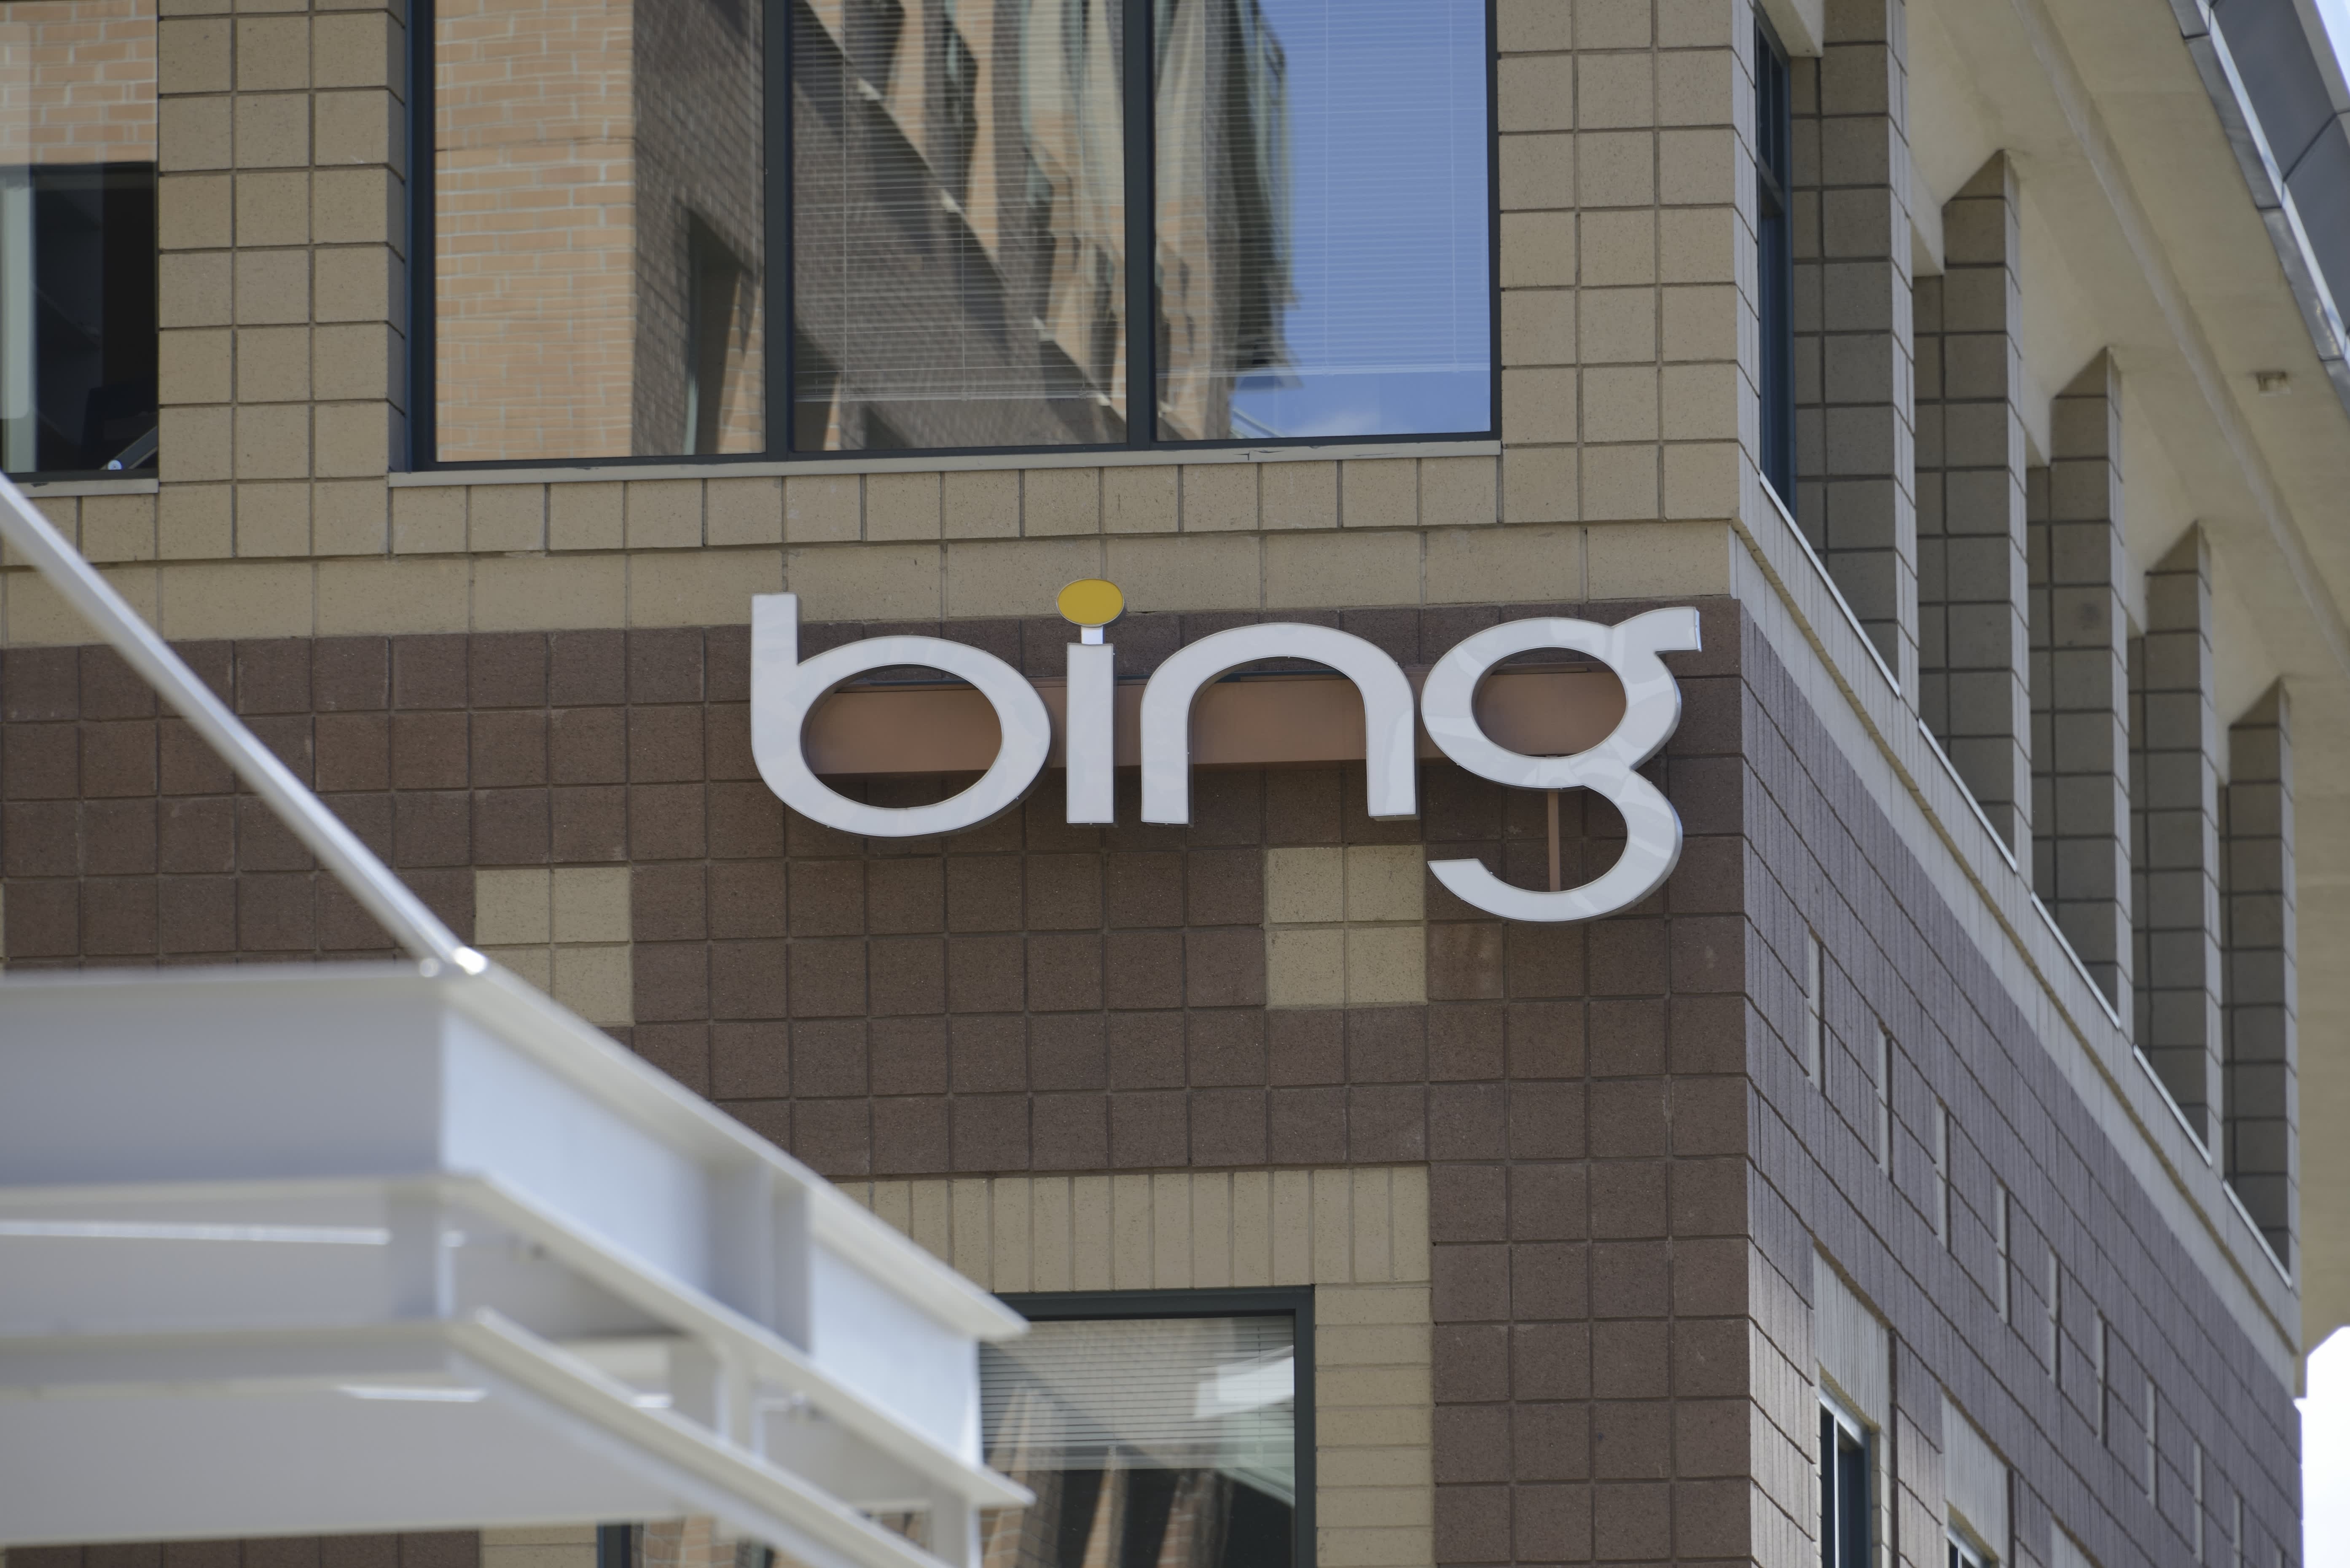 Microsoft's Bing says it suspended auto suggest function in China at government's behest